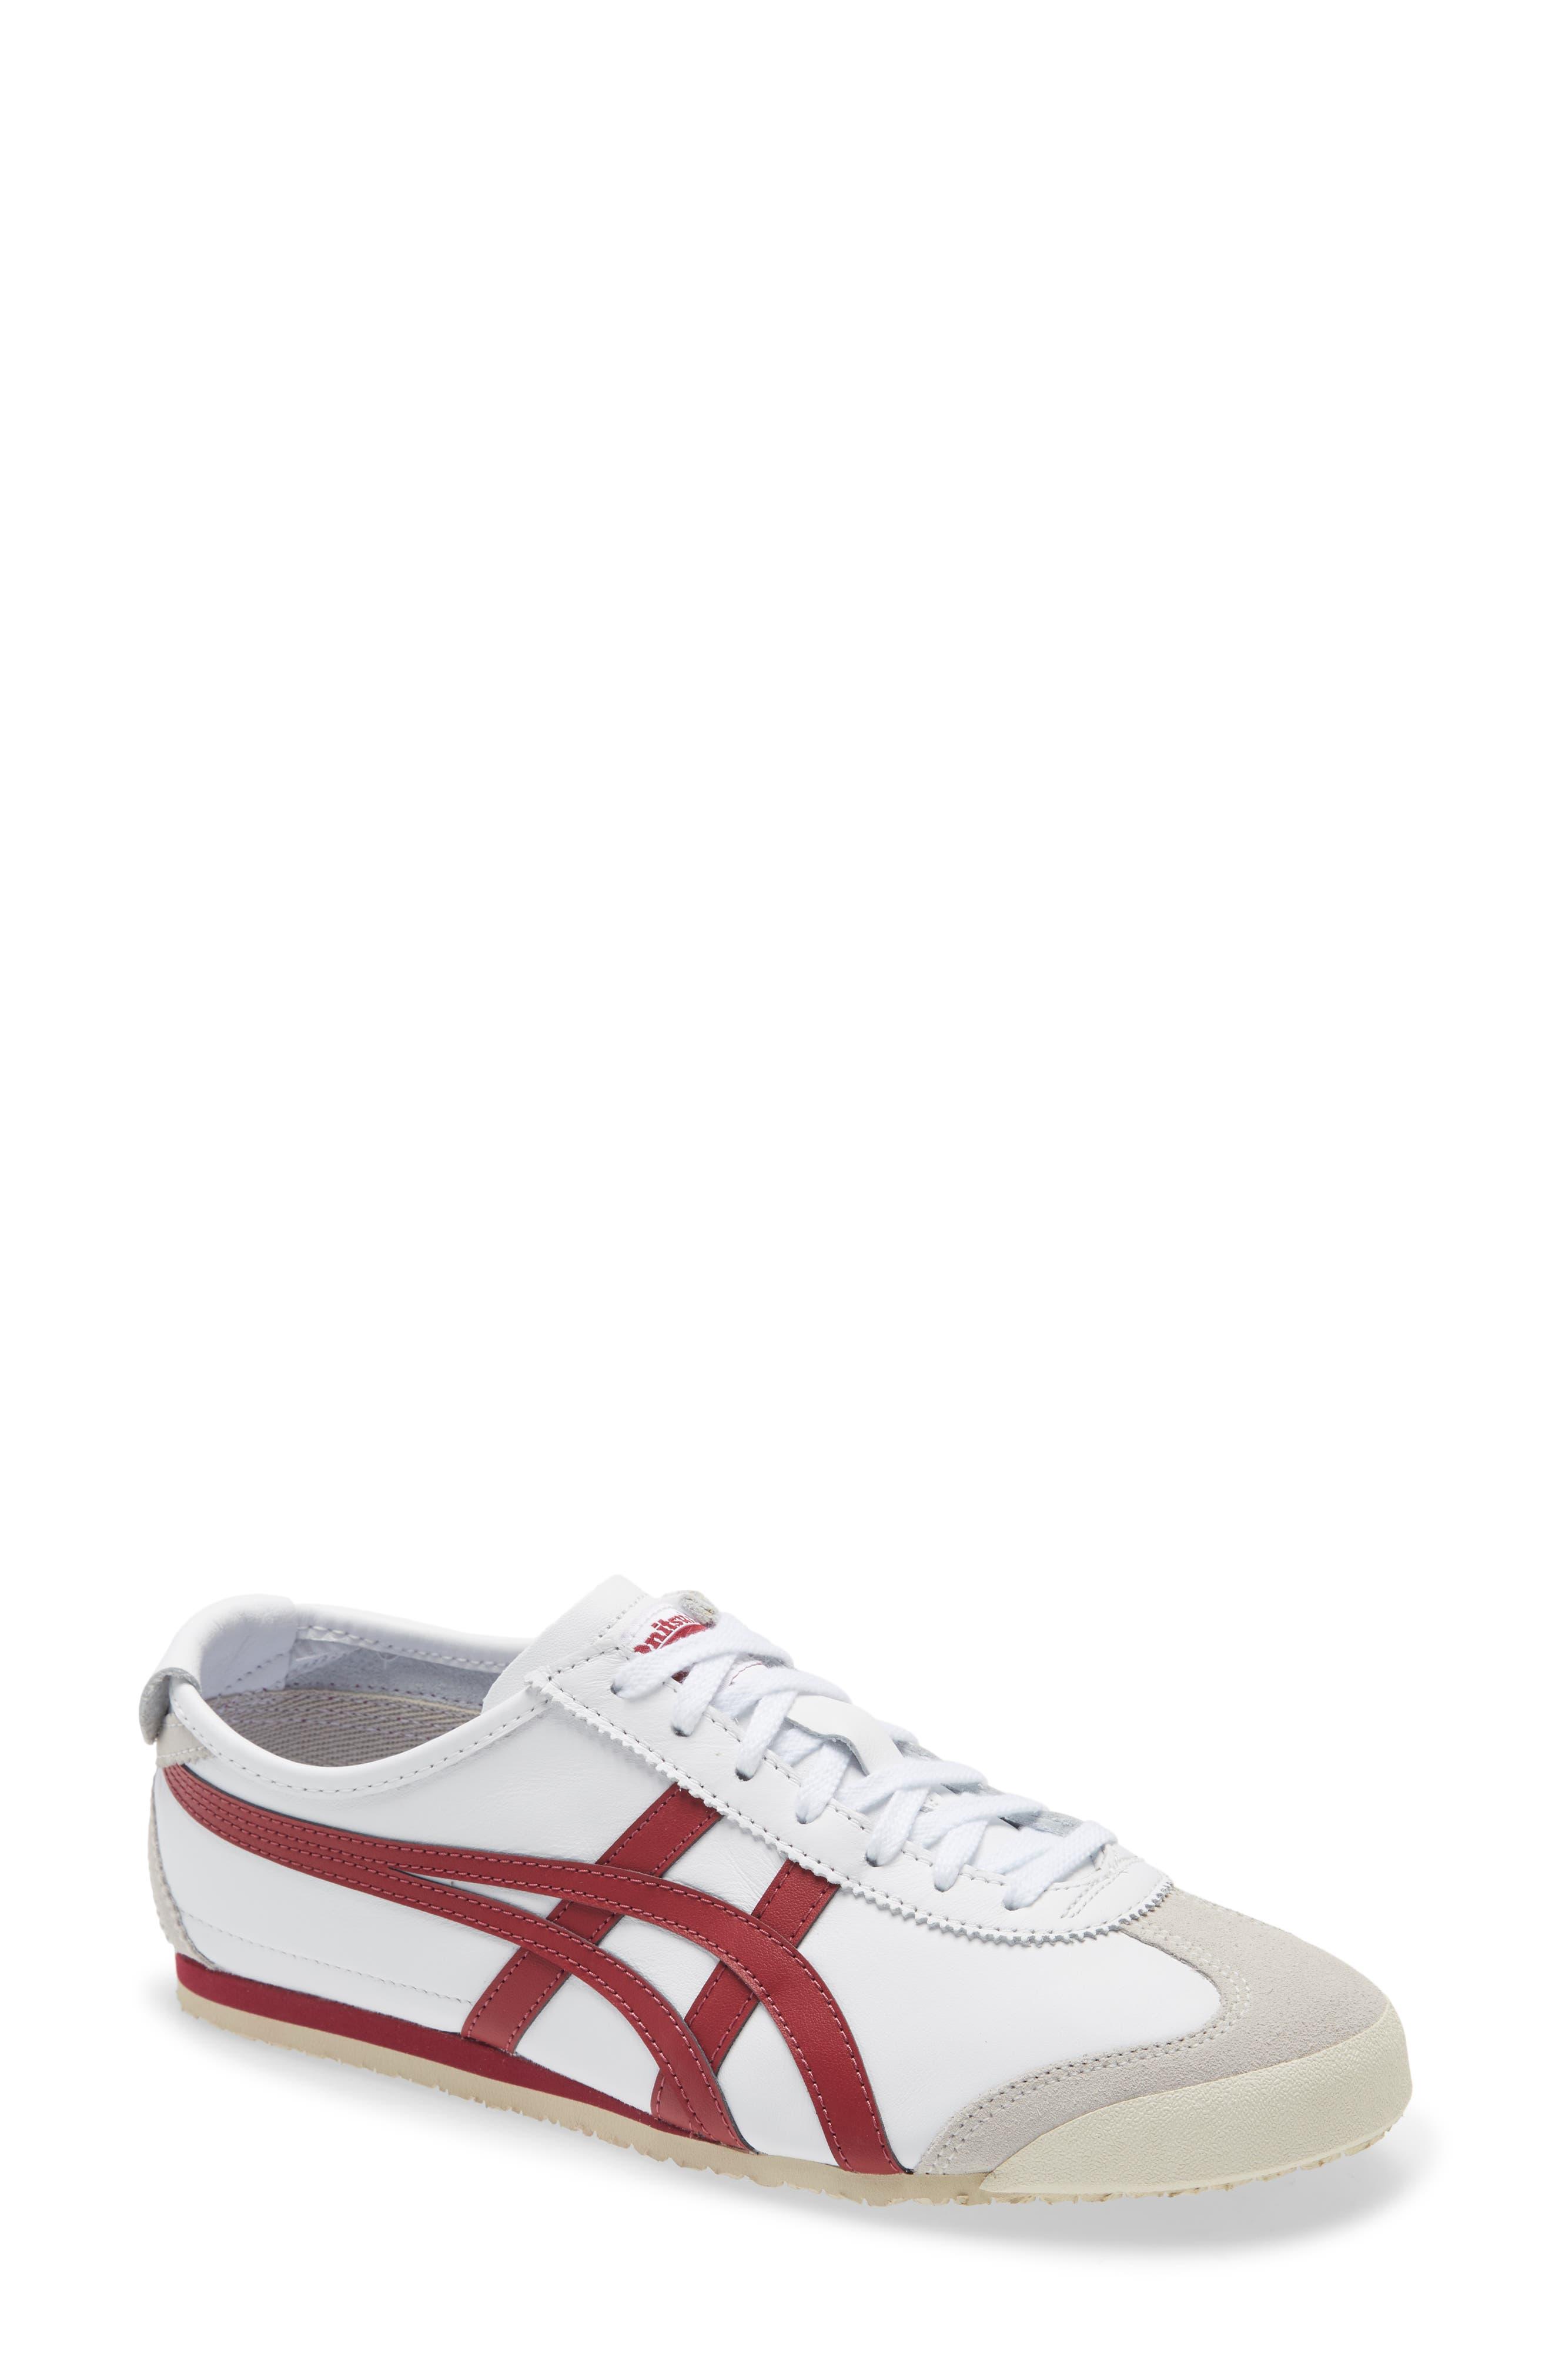 Onitsuka Tiger Tm Mexico 66 Low Top Sneaker In White/burgundy At Nordstrom  Rack for Men | Lyst